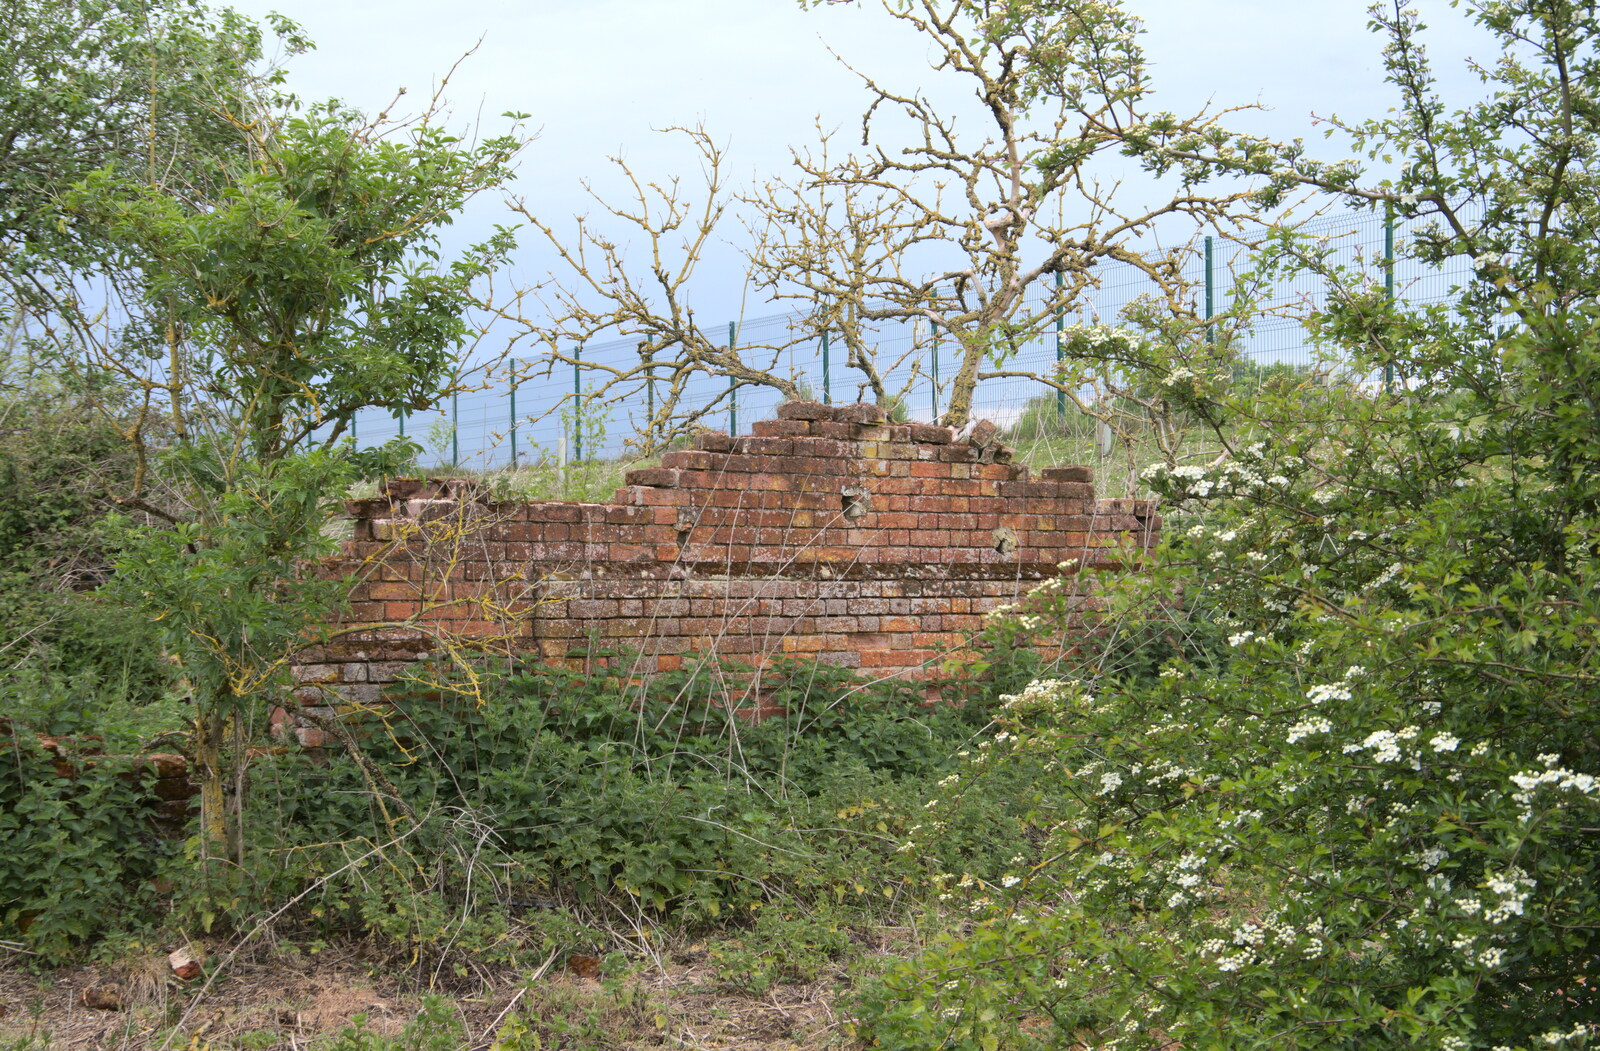 Some derelict cow sheds from The Quest for Rapsy Tapsy Lane, Eye, Suffolk - 6th May 2020